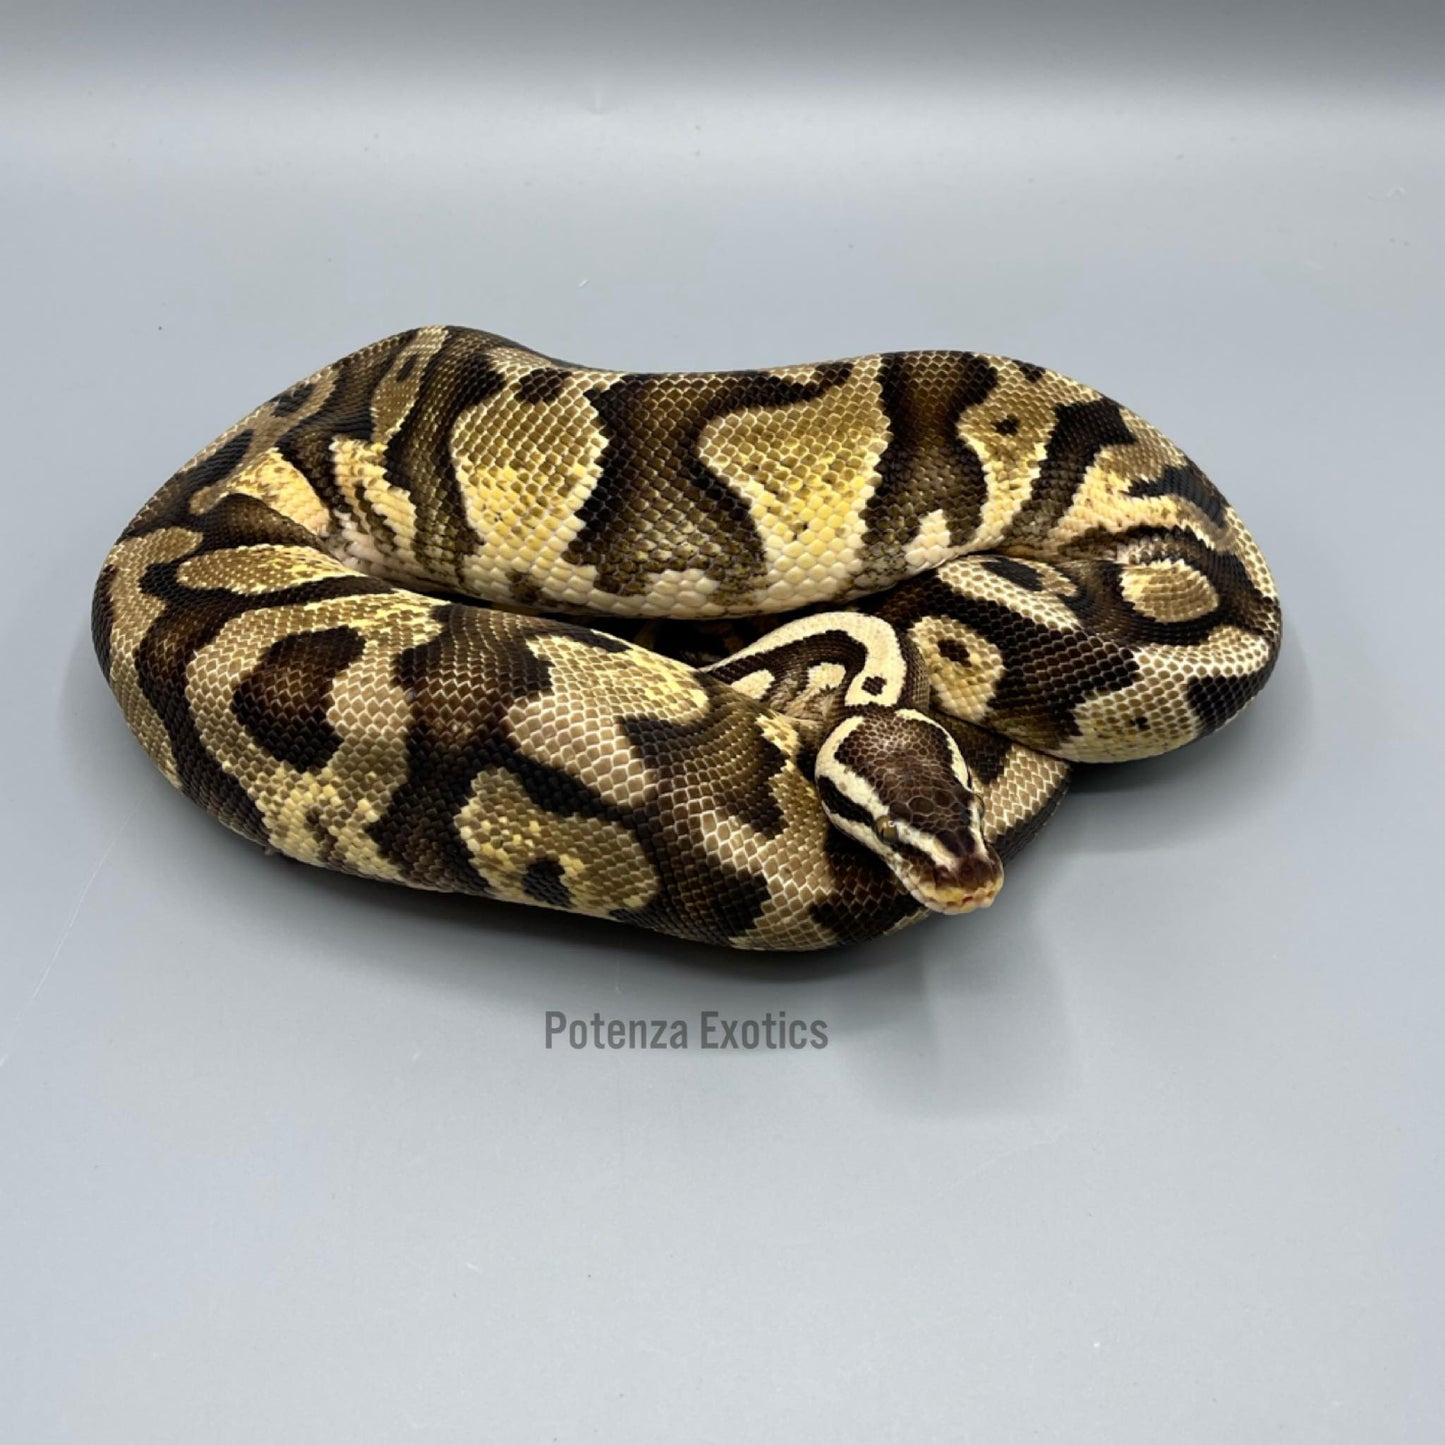 Male Pastel Yellowbelly Het Pied Ball Python